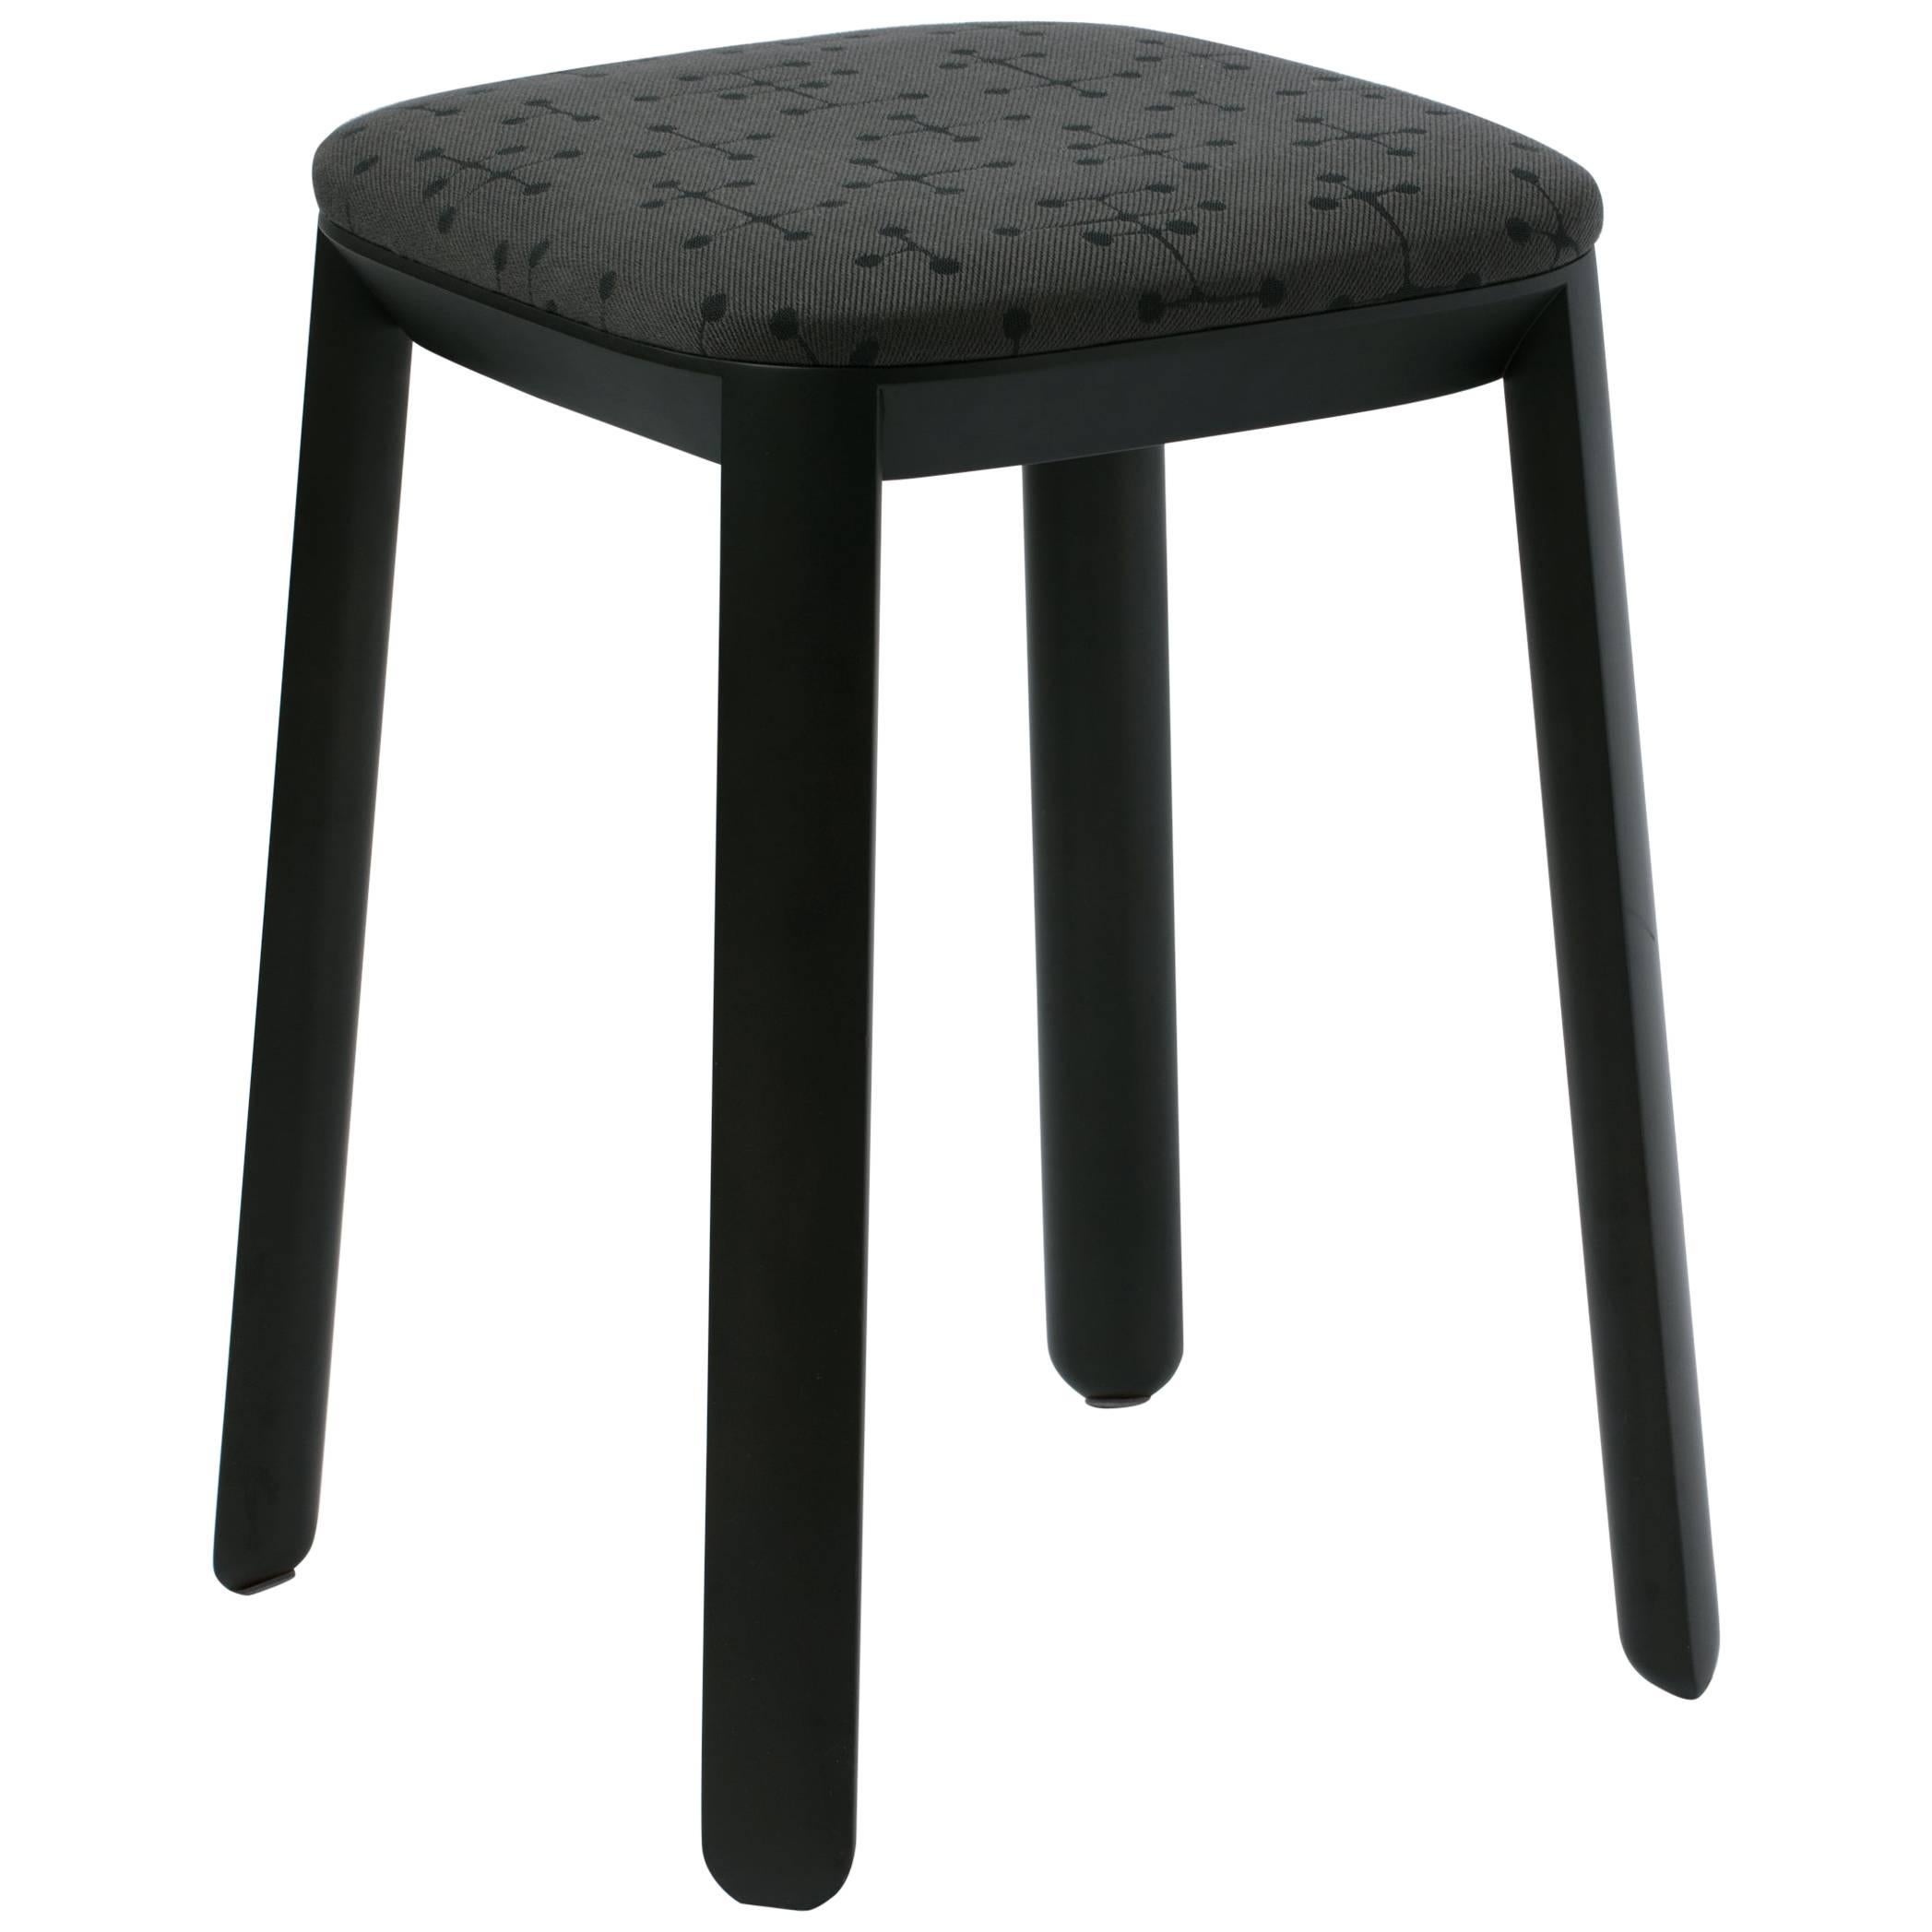 Maharam Covered Stool by Scholten & Baijings 